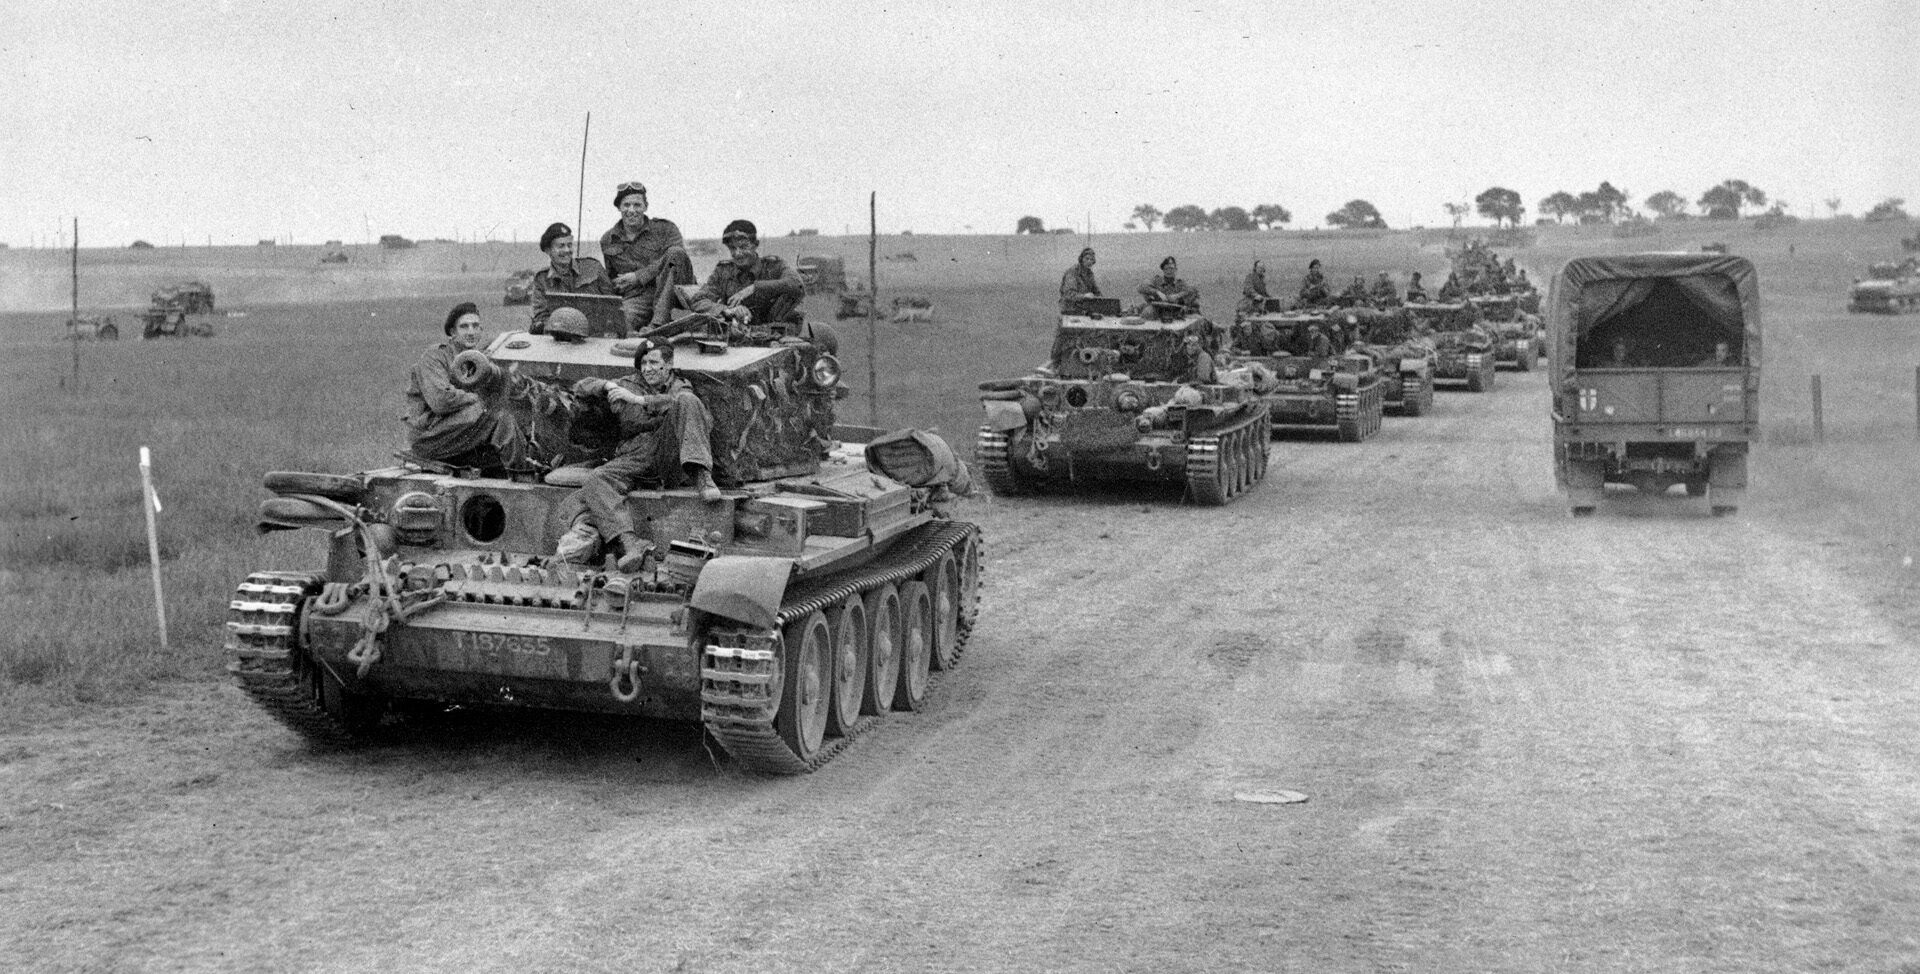 Rearmed and refueld, a long line of British Cromwell tanks prepare to move out along a dirt road near Caen. Stubborn German resistance at Caen prevented the British from taking the city until July 20, by which time the crossroads city had lost its strategic value.